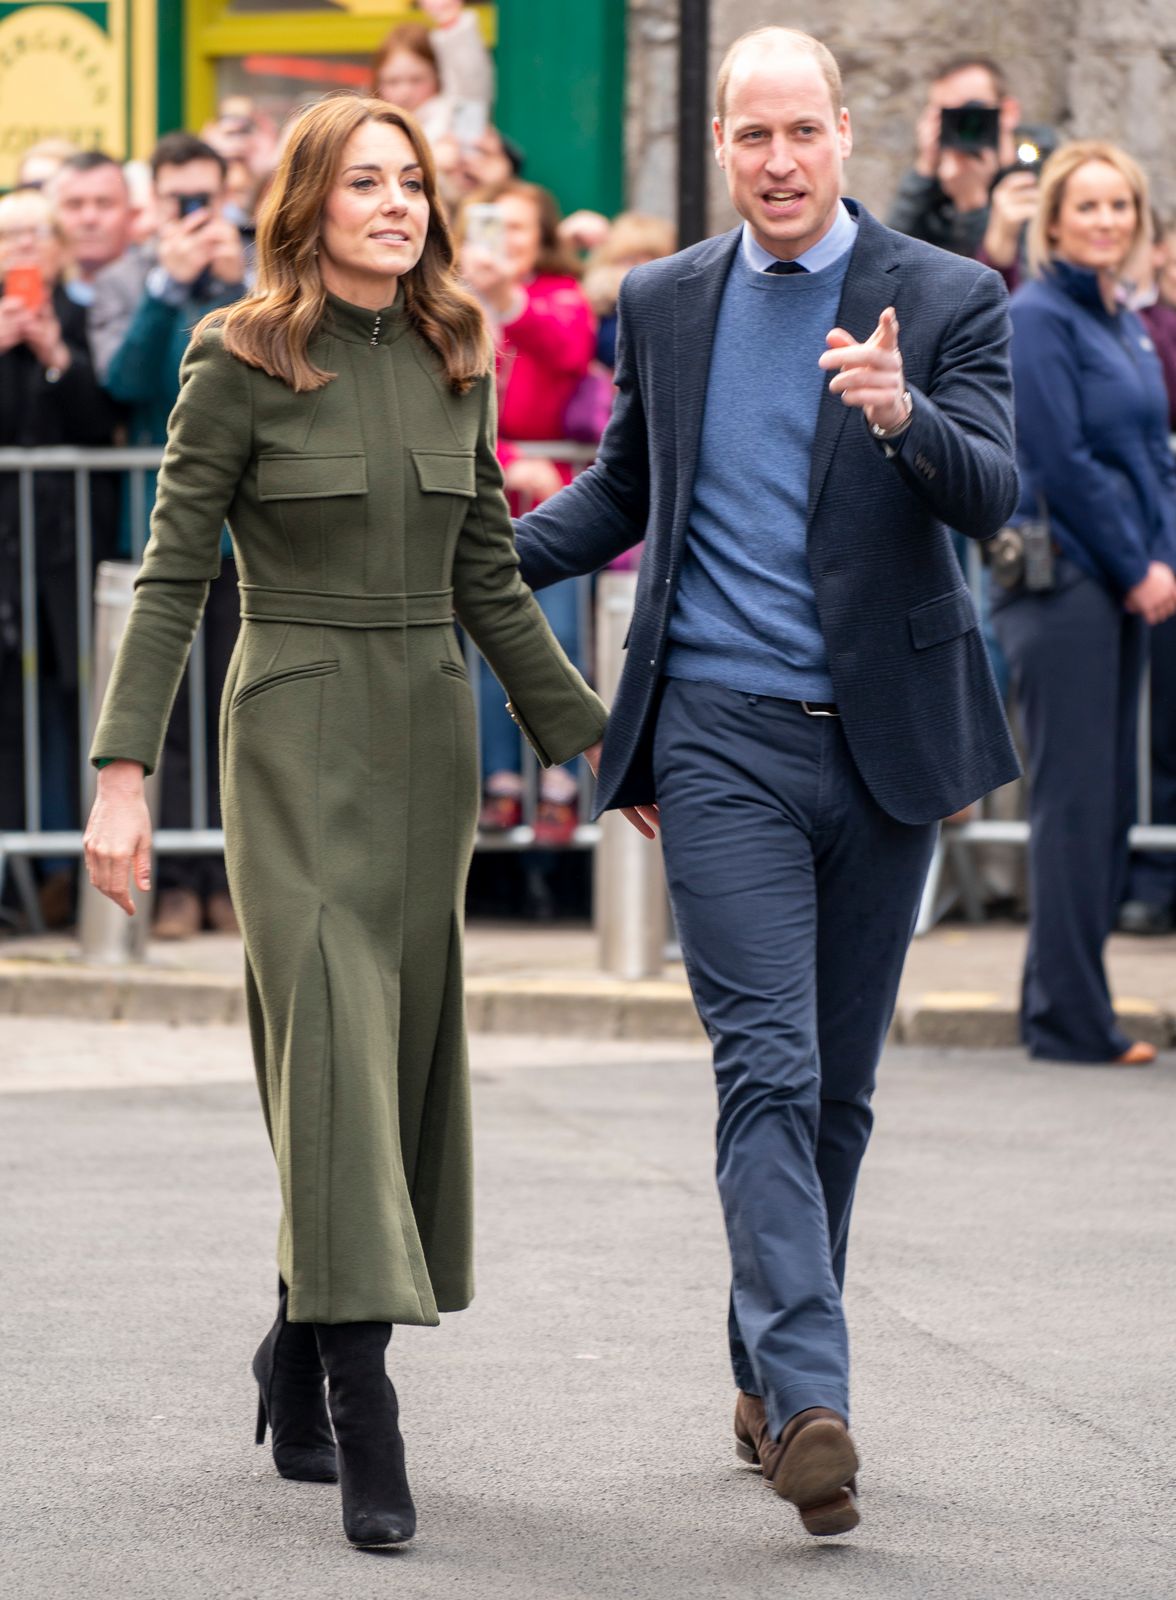 Prince William, Duke of Cambridge and Catherine, Duchess of Cambridge meet members of the public gathered on King Street during day three of their visit to Ireland on March 5, 2020 in Galway, Ireland.| Photo: Getty Images